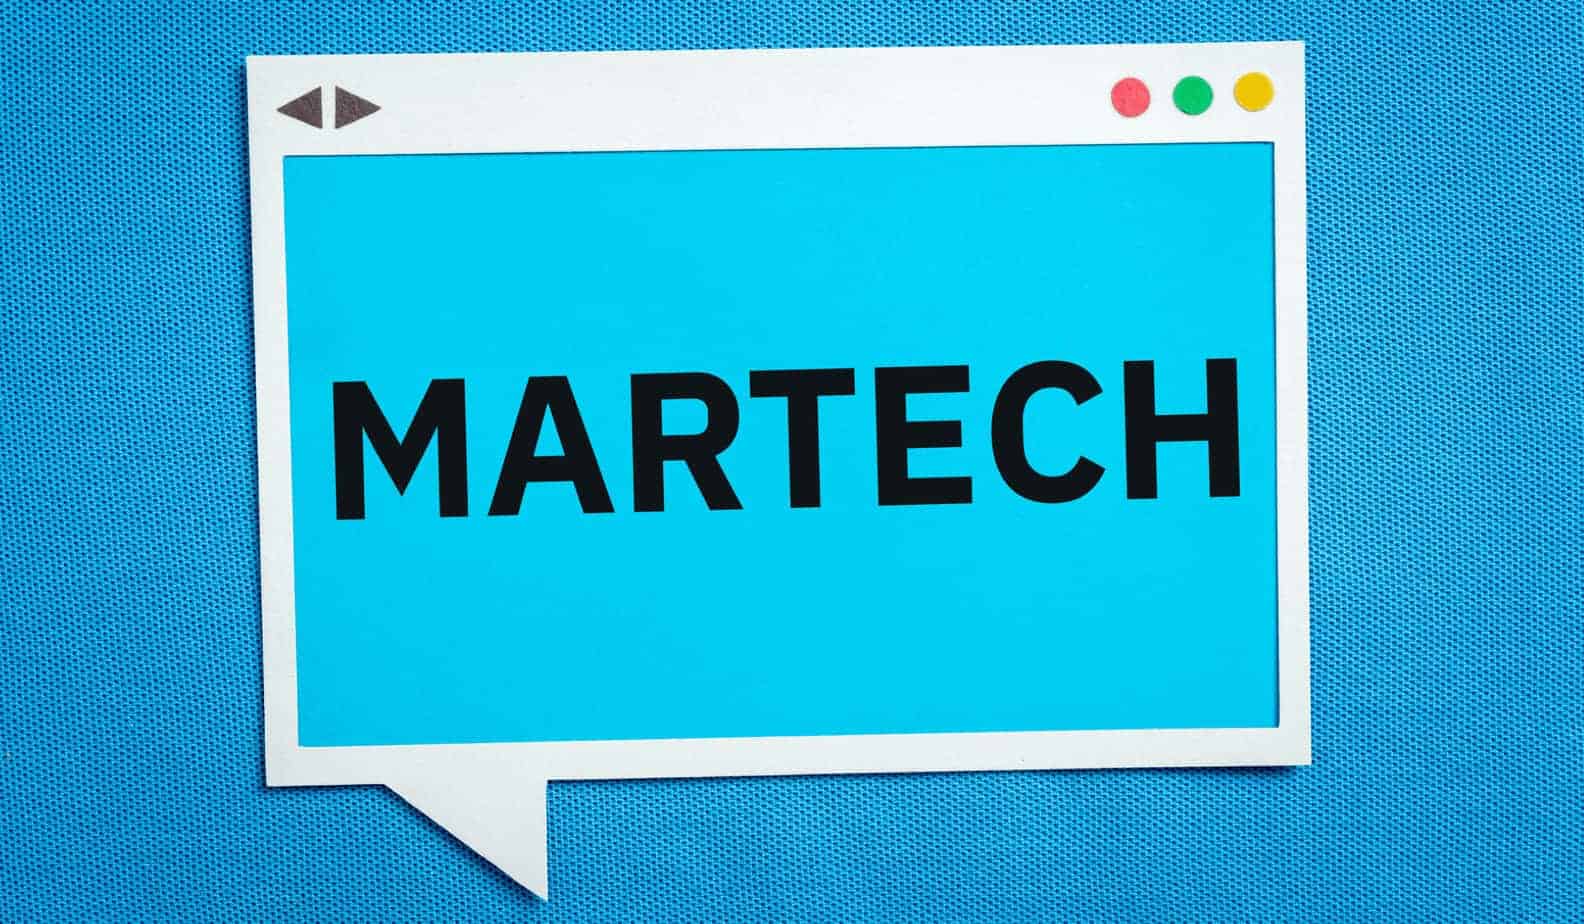 Words 'martech' on animated computer browser window